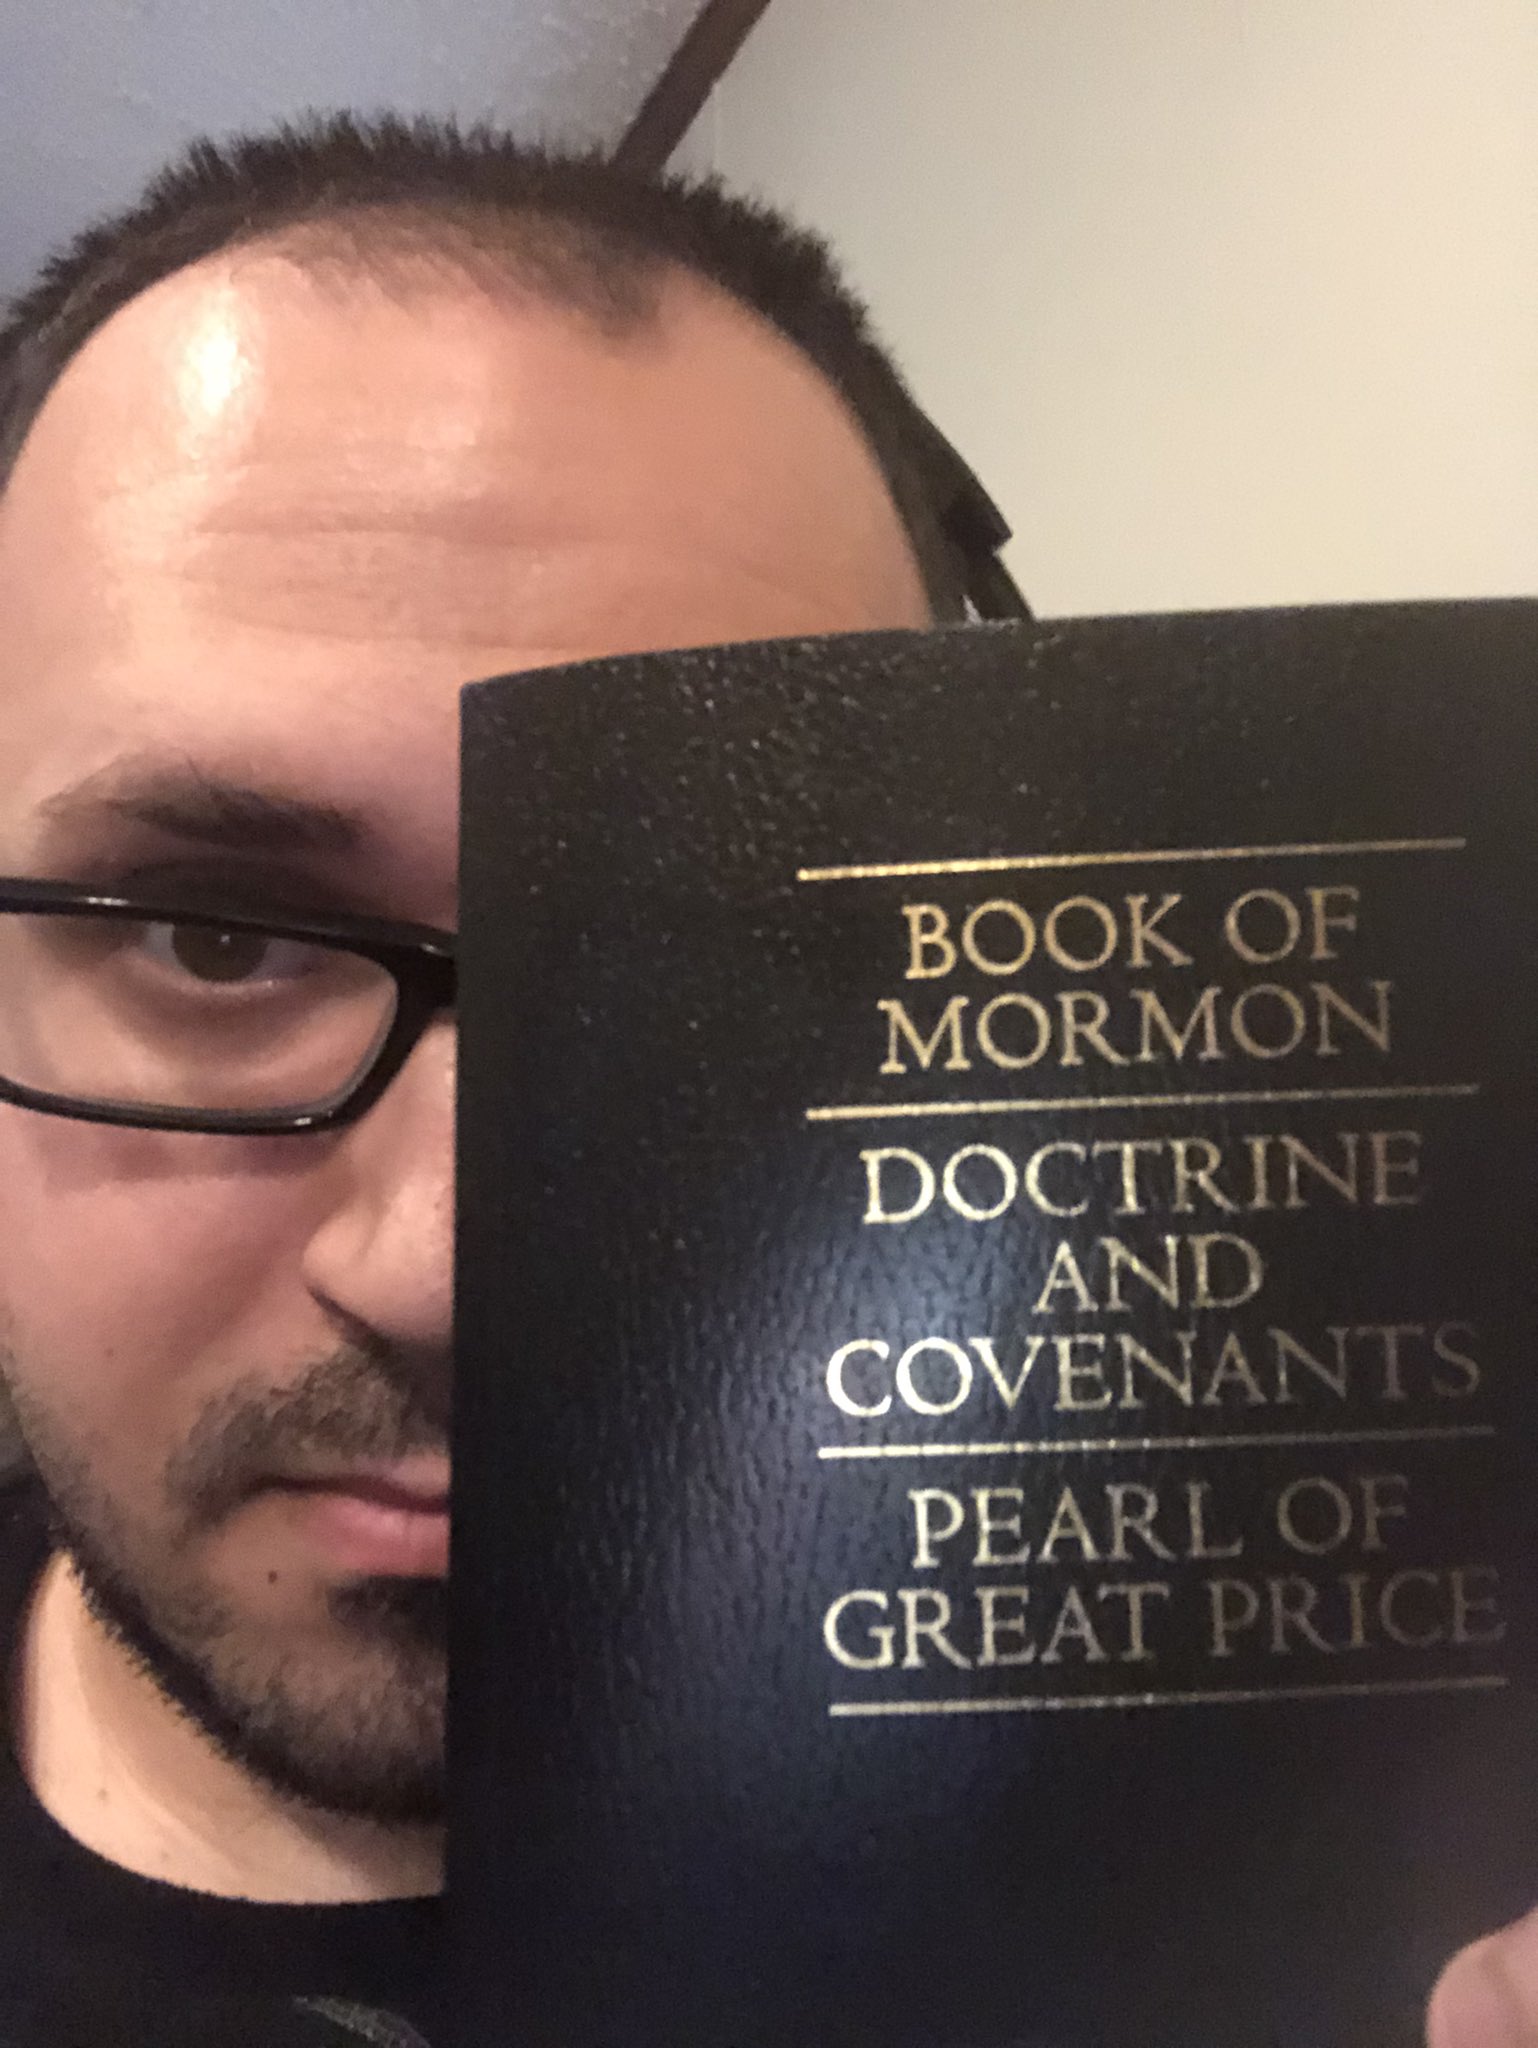 Reformed Christian Apologist on Twitter: "Currently reading 1 Nephi 4